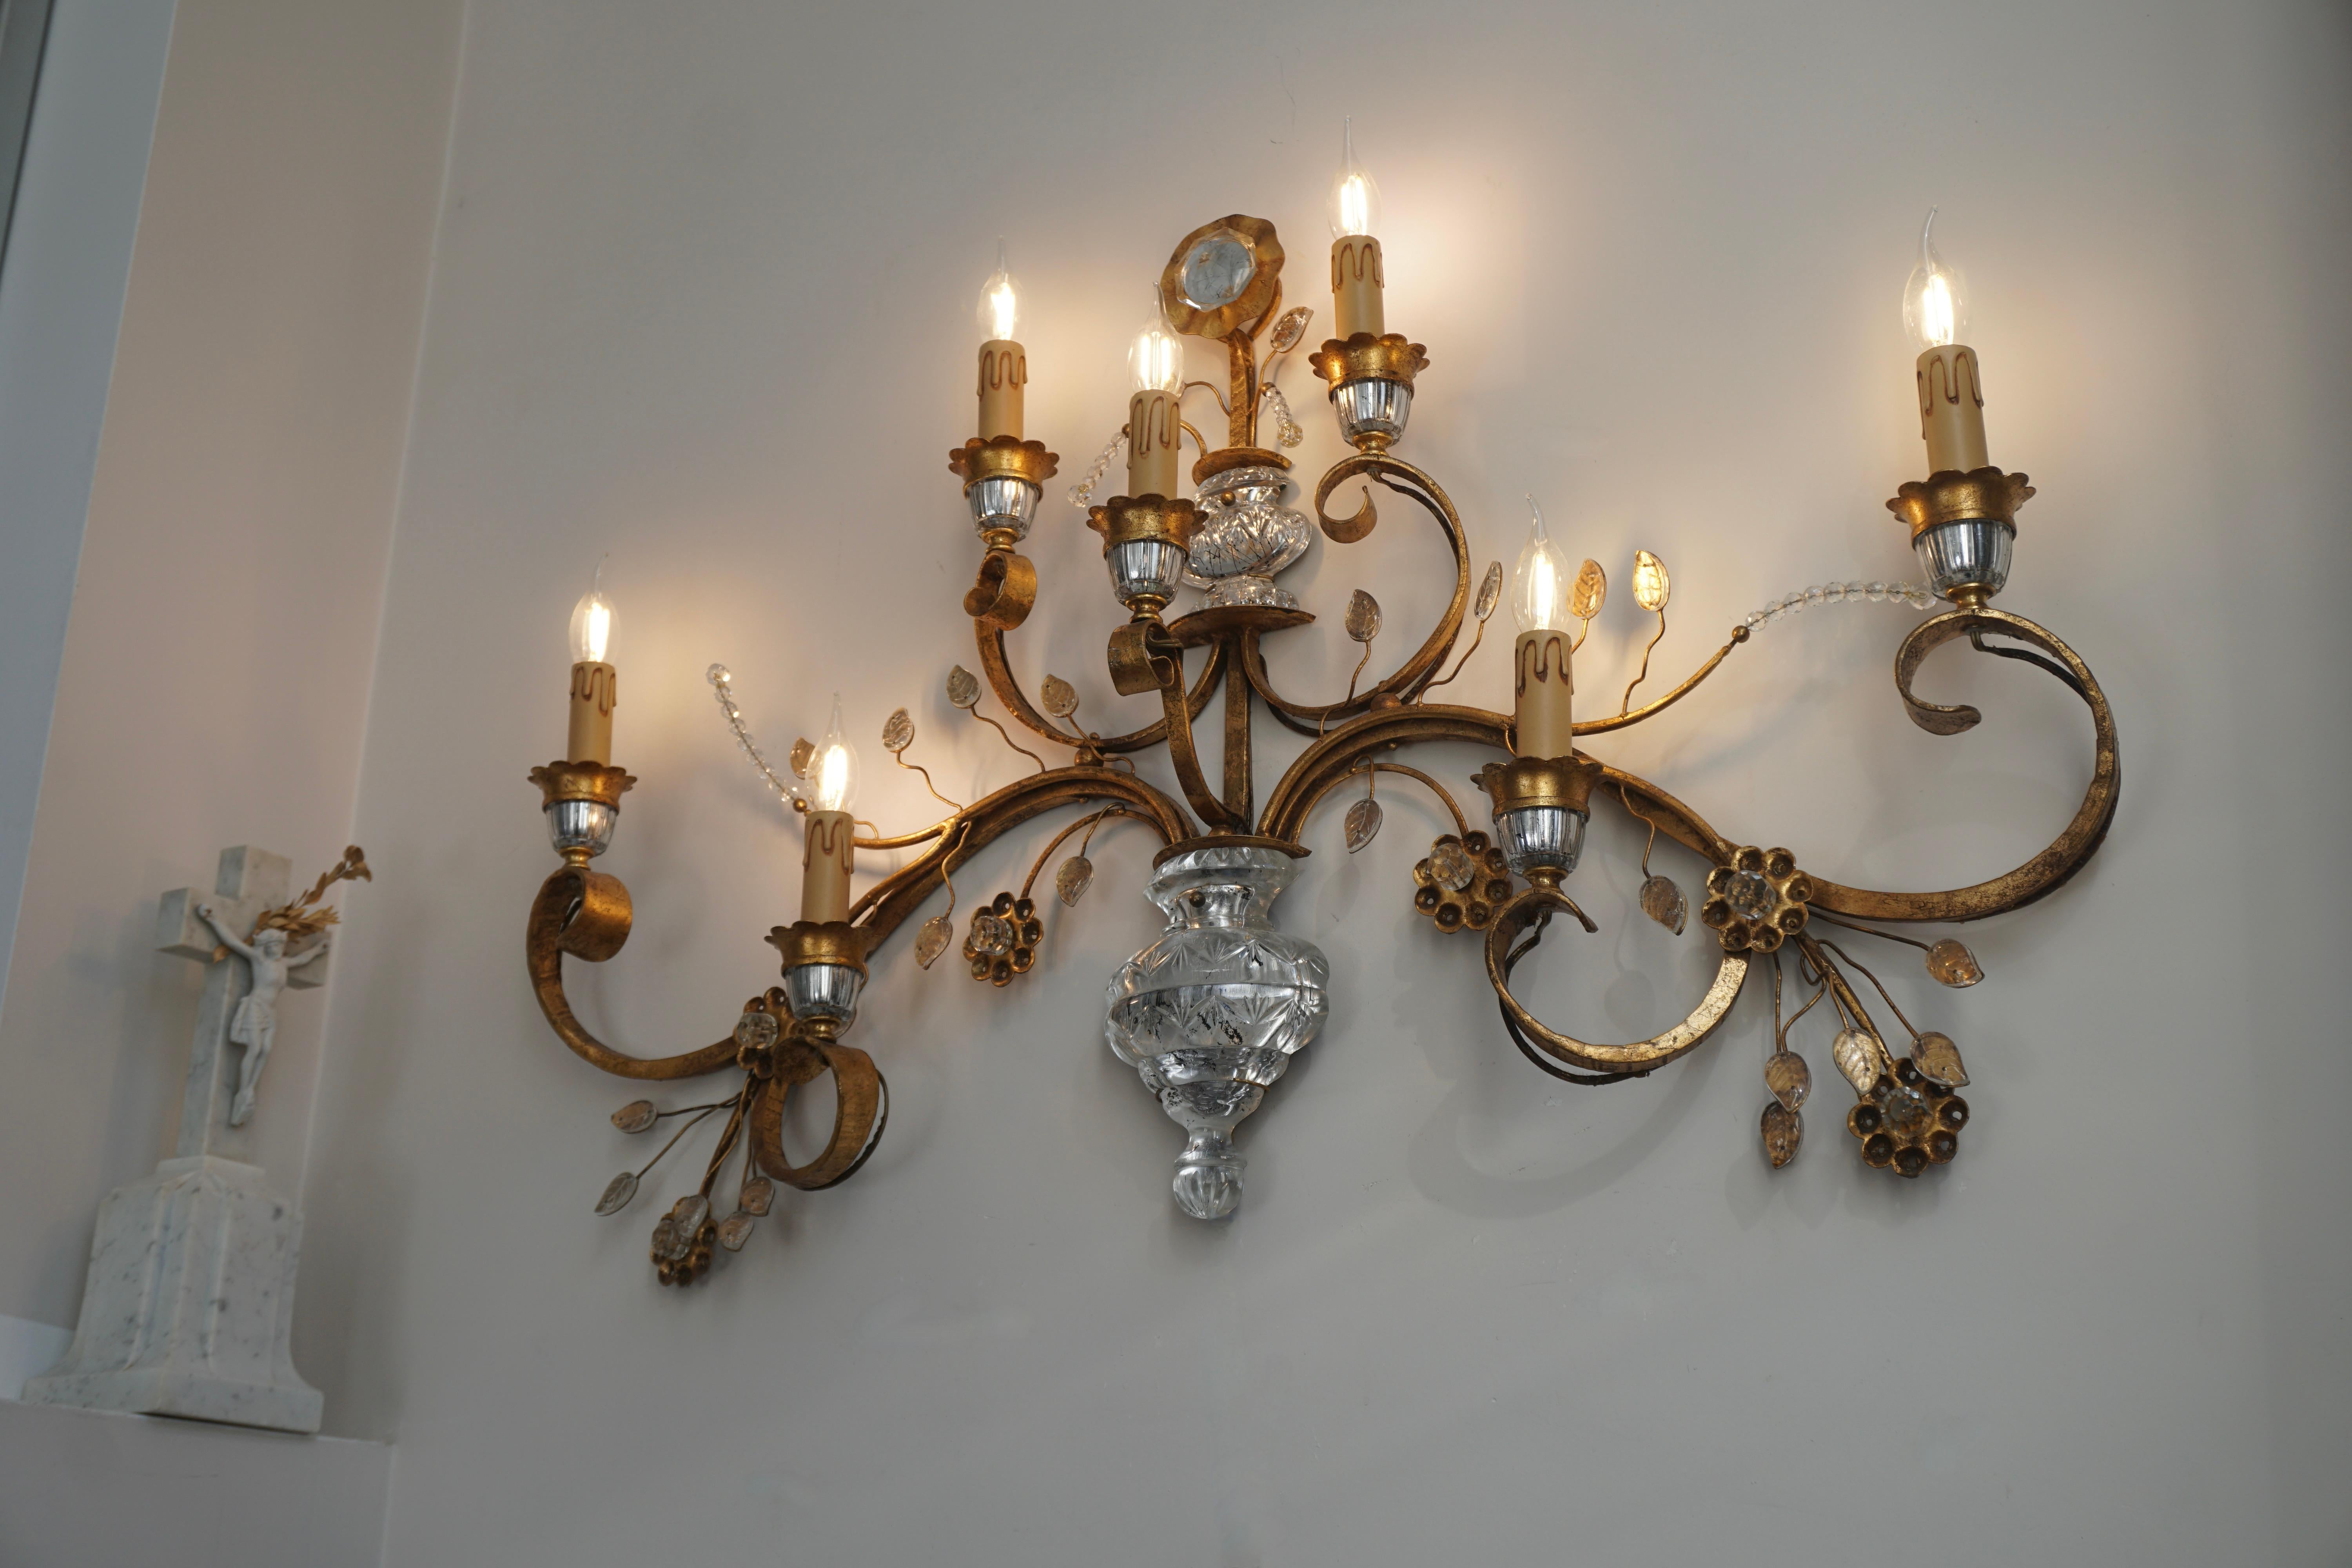 20th Century Gilded Metal Leaf and Glass Flower Wall Sconce Light Fixture For Sale